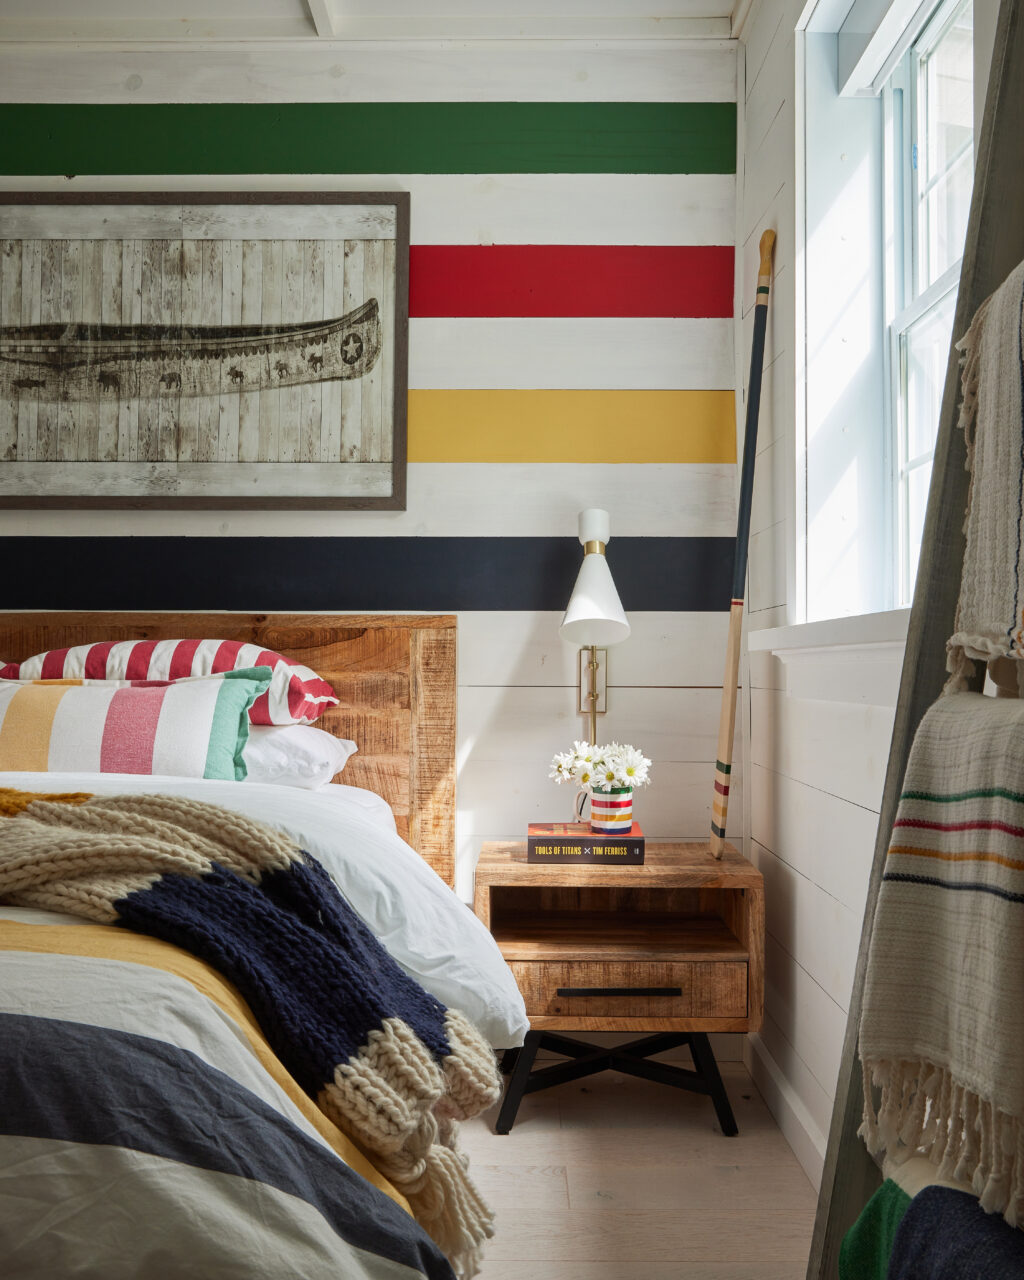 Room painted with HBC coloured stripes on the walls